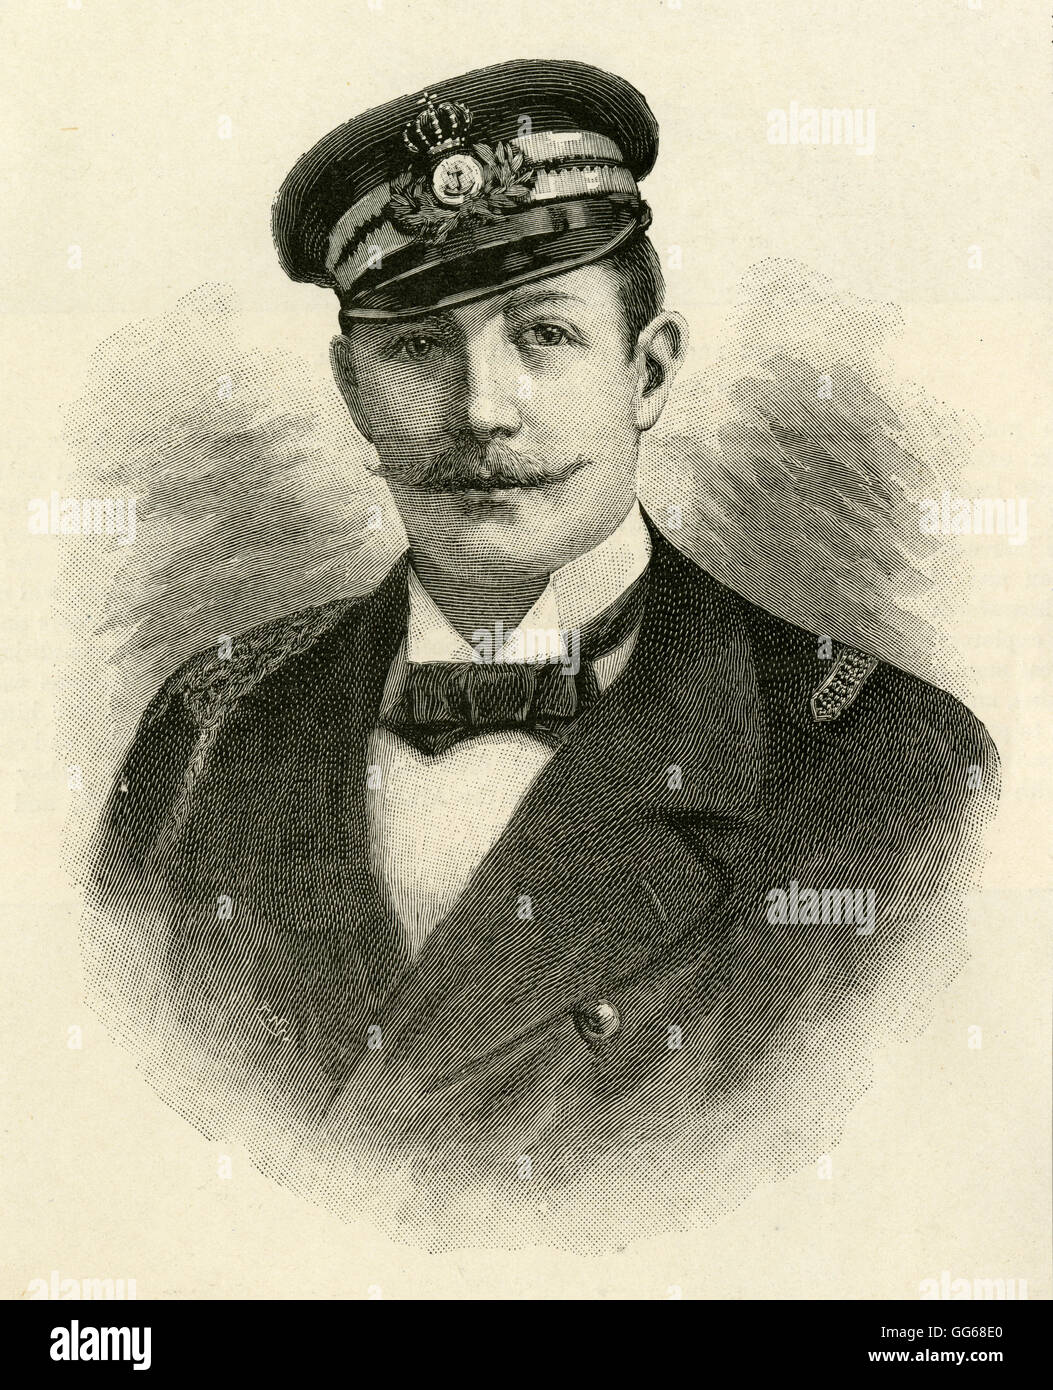 Antique c1910 engraving, Prince George of Greece and Denmark (1869-1957) was the second son of George I of Greece and Olga Konstantinovna of Russia, and is remembered chiefly for having once saved the life of the future Emperor of Russia, Nicholas II in 1891 during their visit to Japan together. SOURCE: ORIGINAL STEEL ENGRAVING. Stock Photo